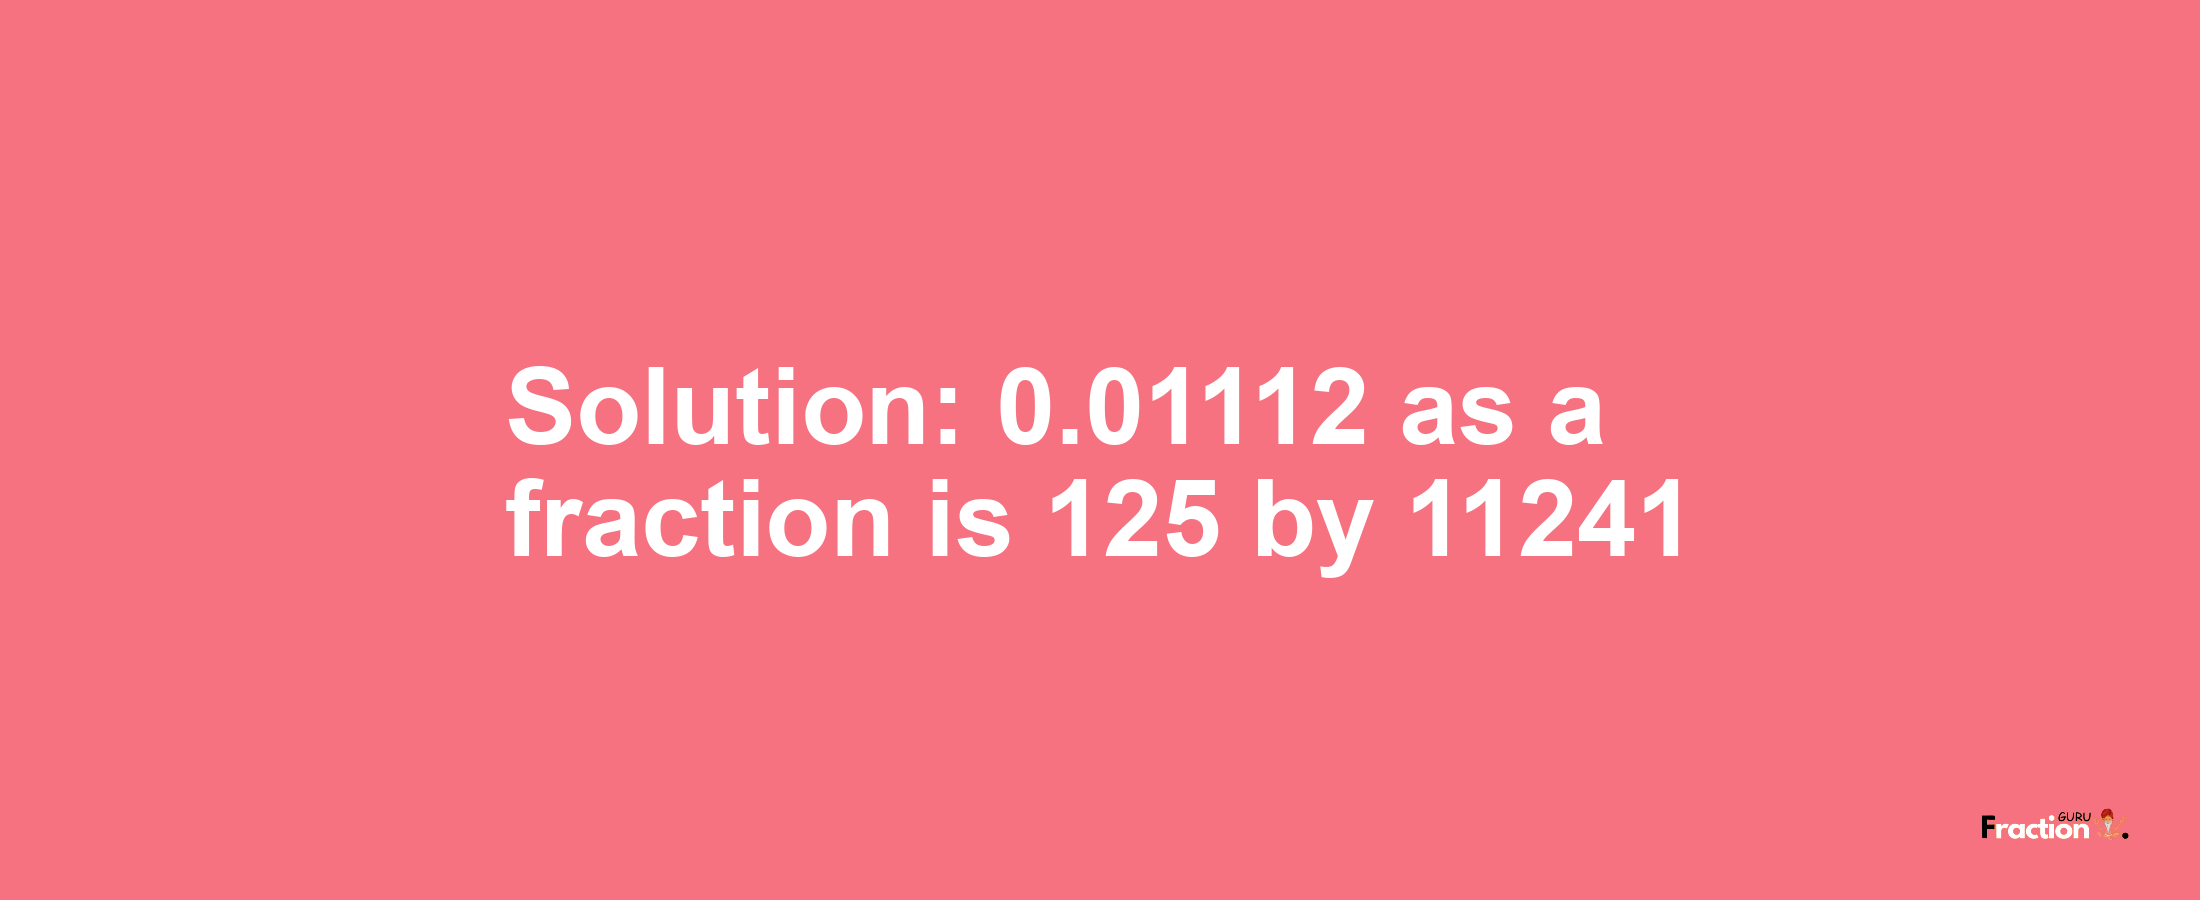 Solution:0.01112 as a fraction is 125/11241